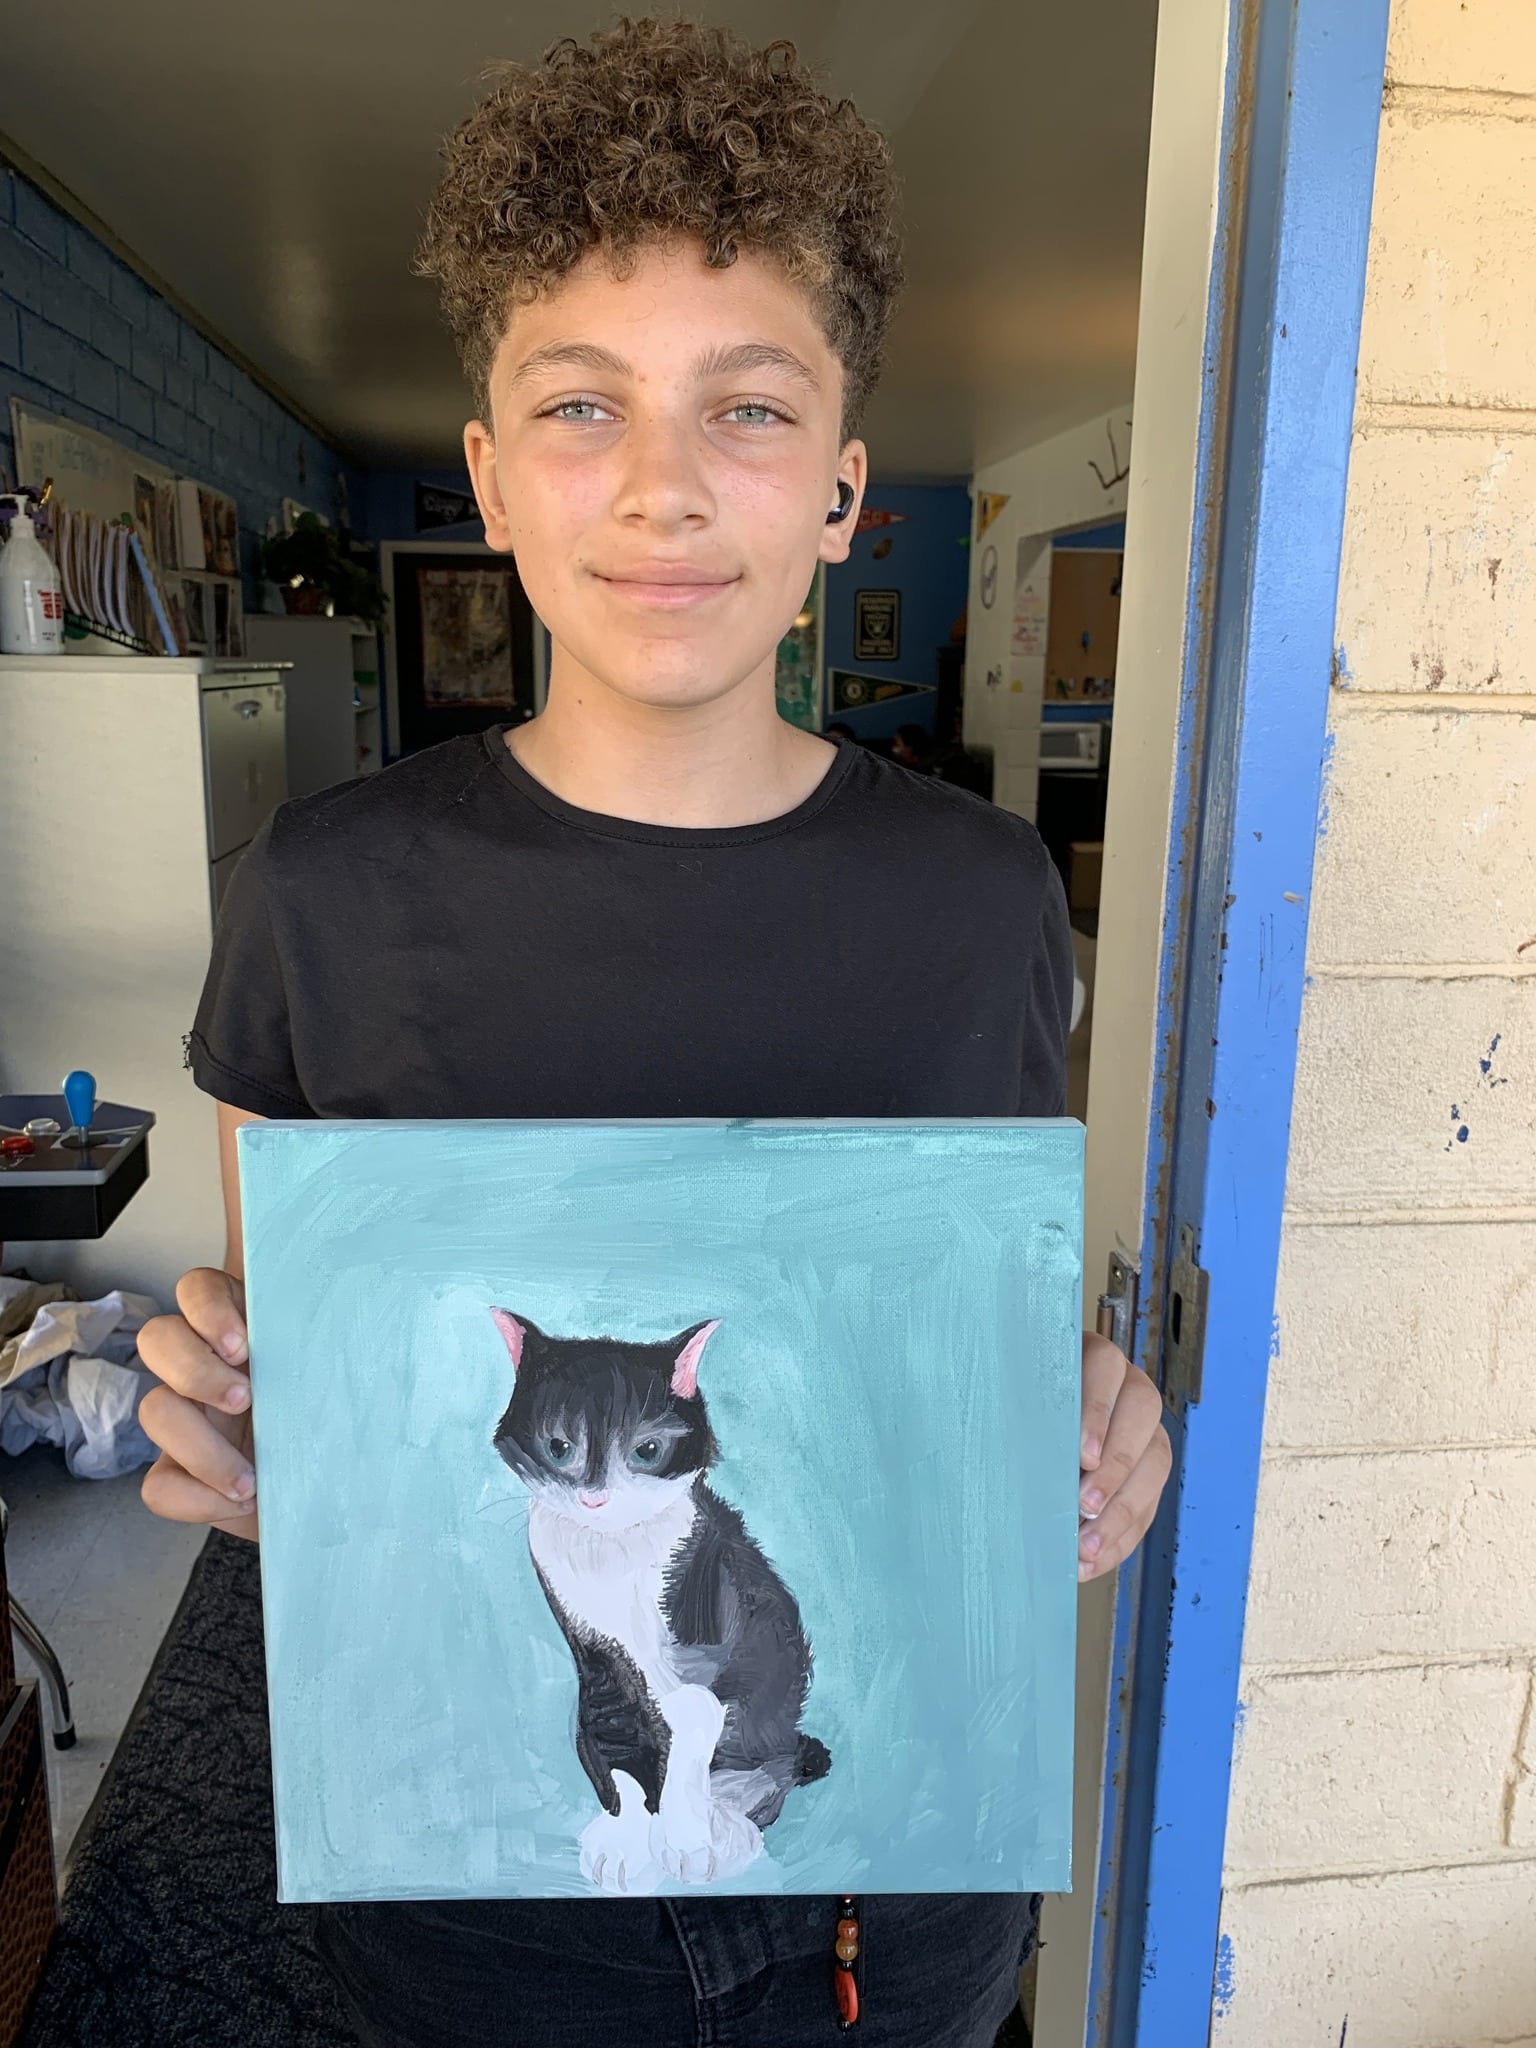 A boy holding a pet portrait he painted of a tabby cat with a white chest